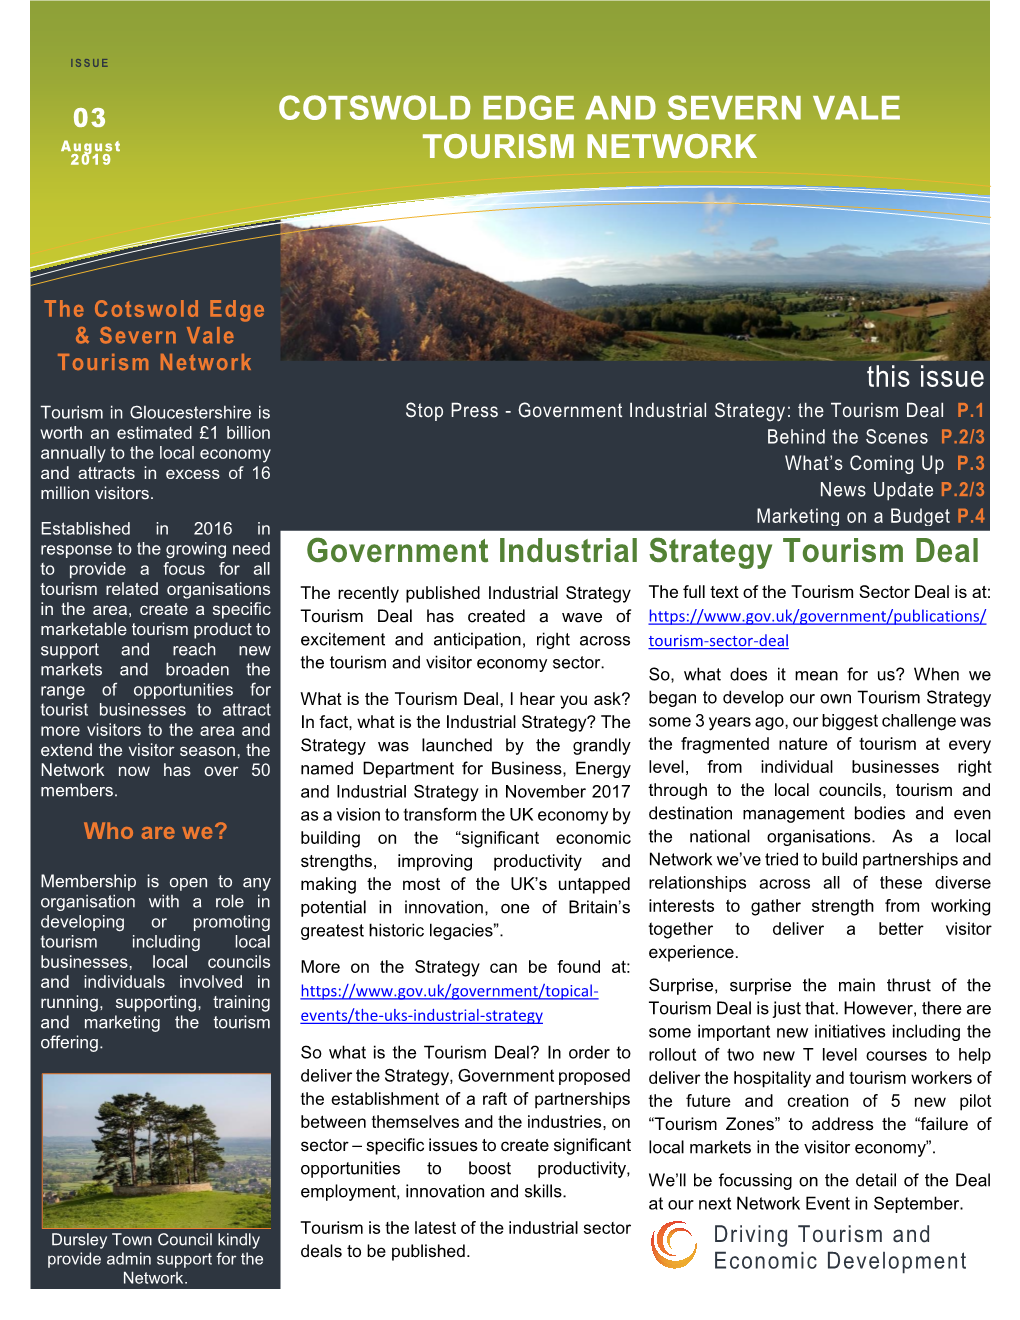 Cotswold Edge & Severn Vale Tourism Network Newsletter